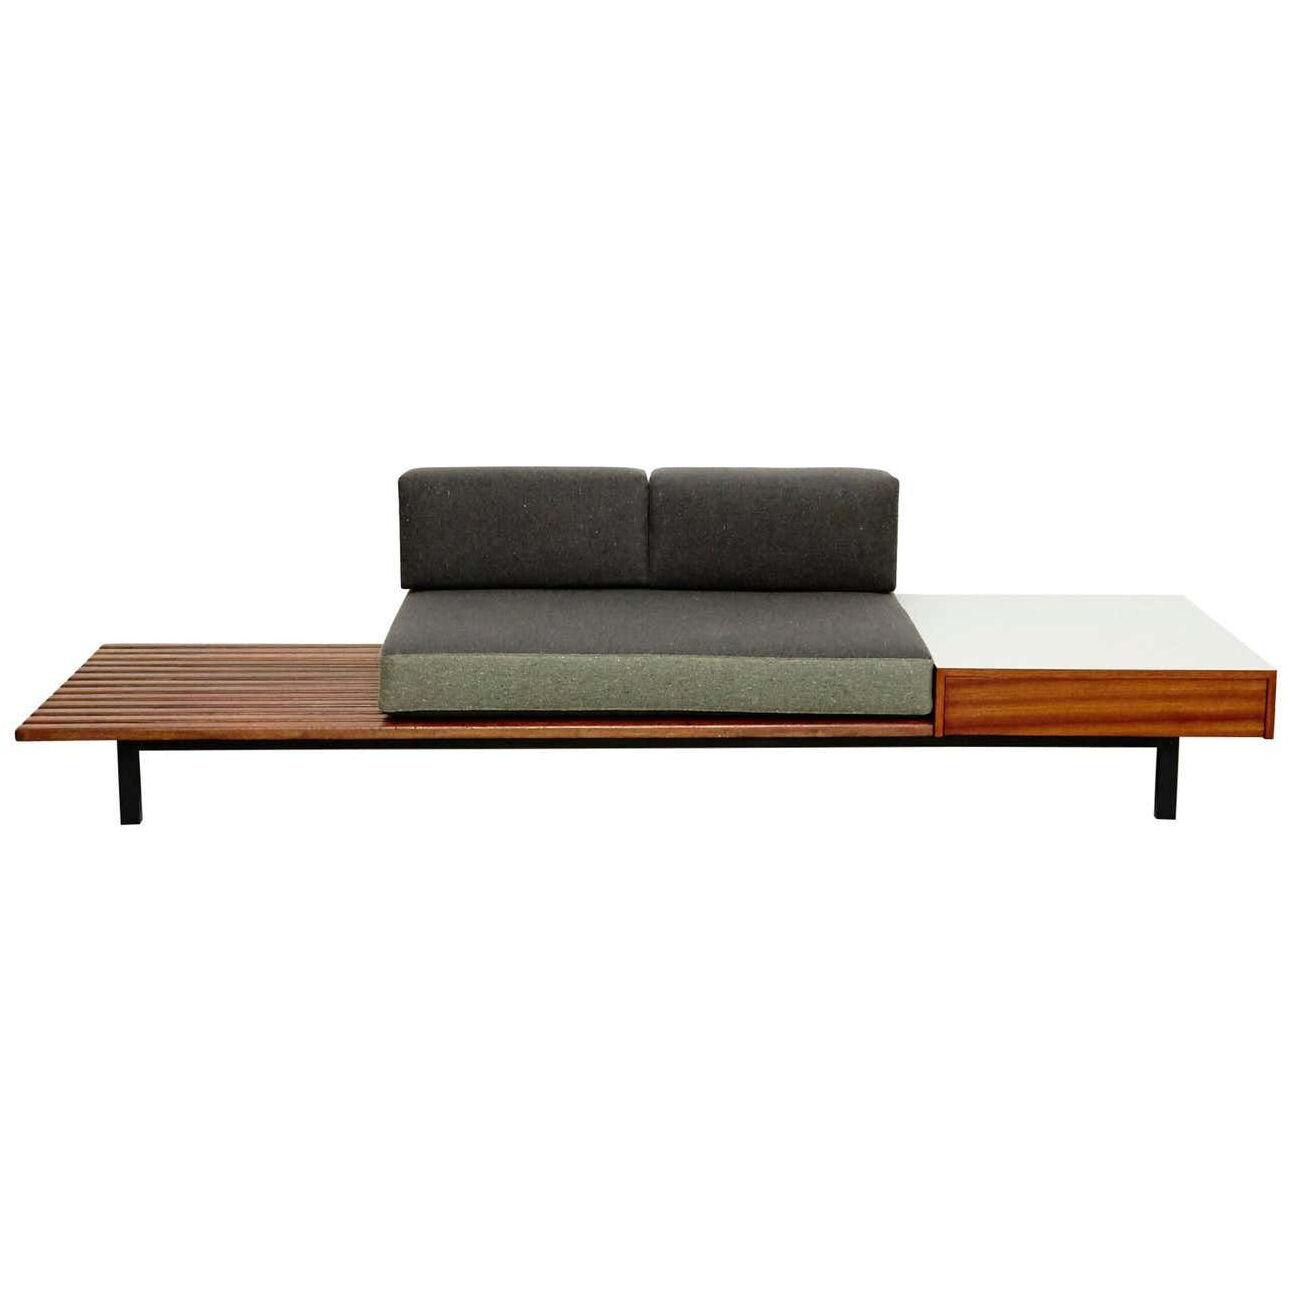 Charlotte Perriand Mid-Century Modern Wood Bench for Cansado circa 1958